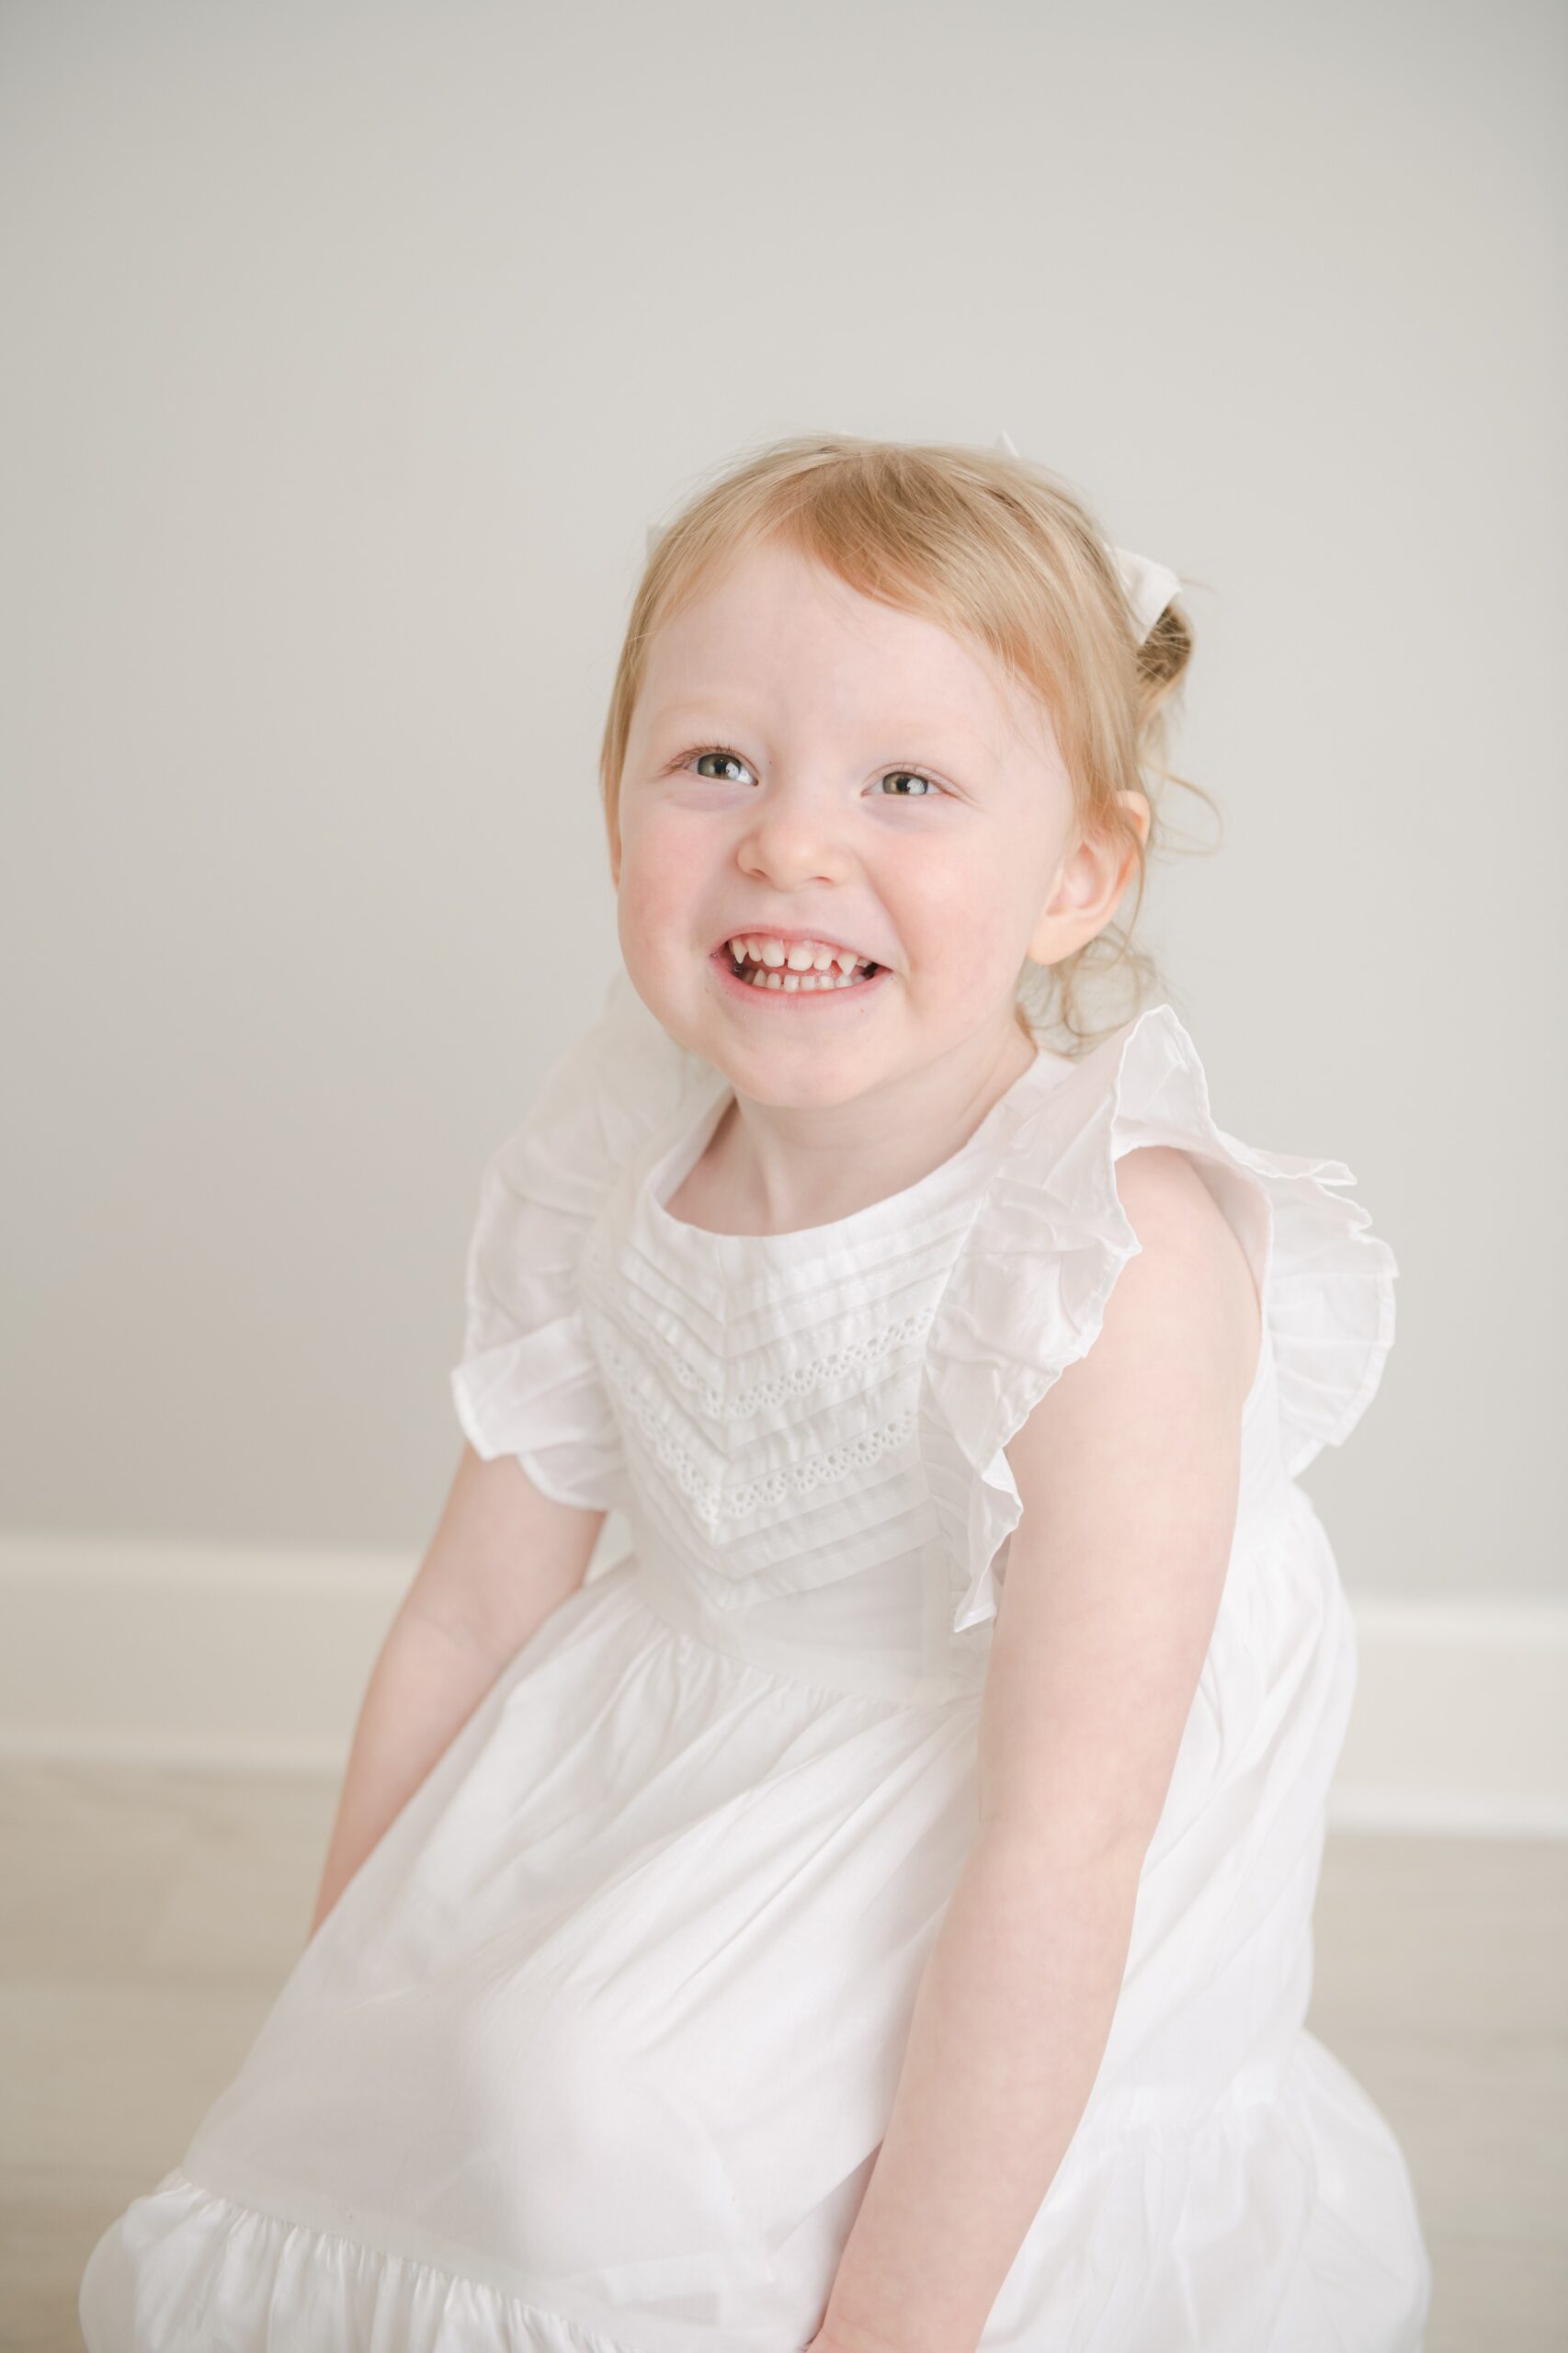 A young girl smiles in a white dress while playing in a studio